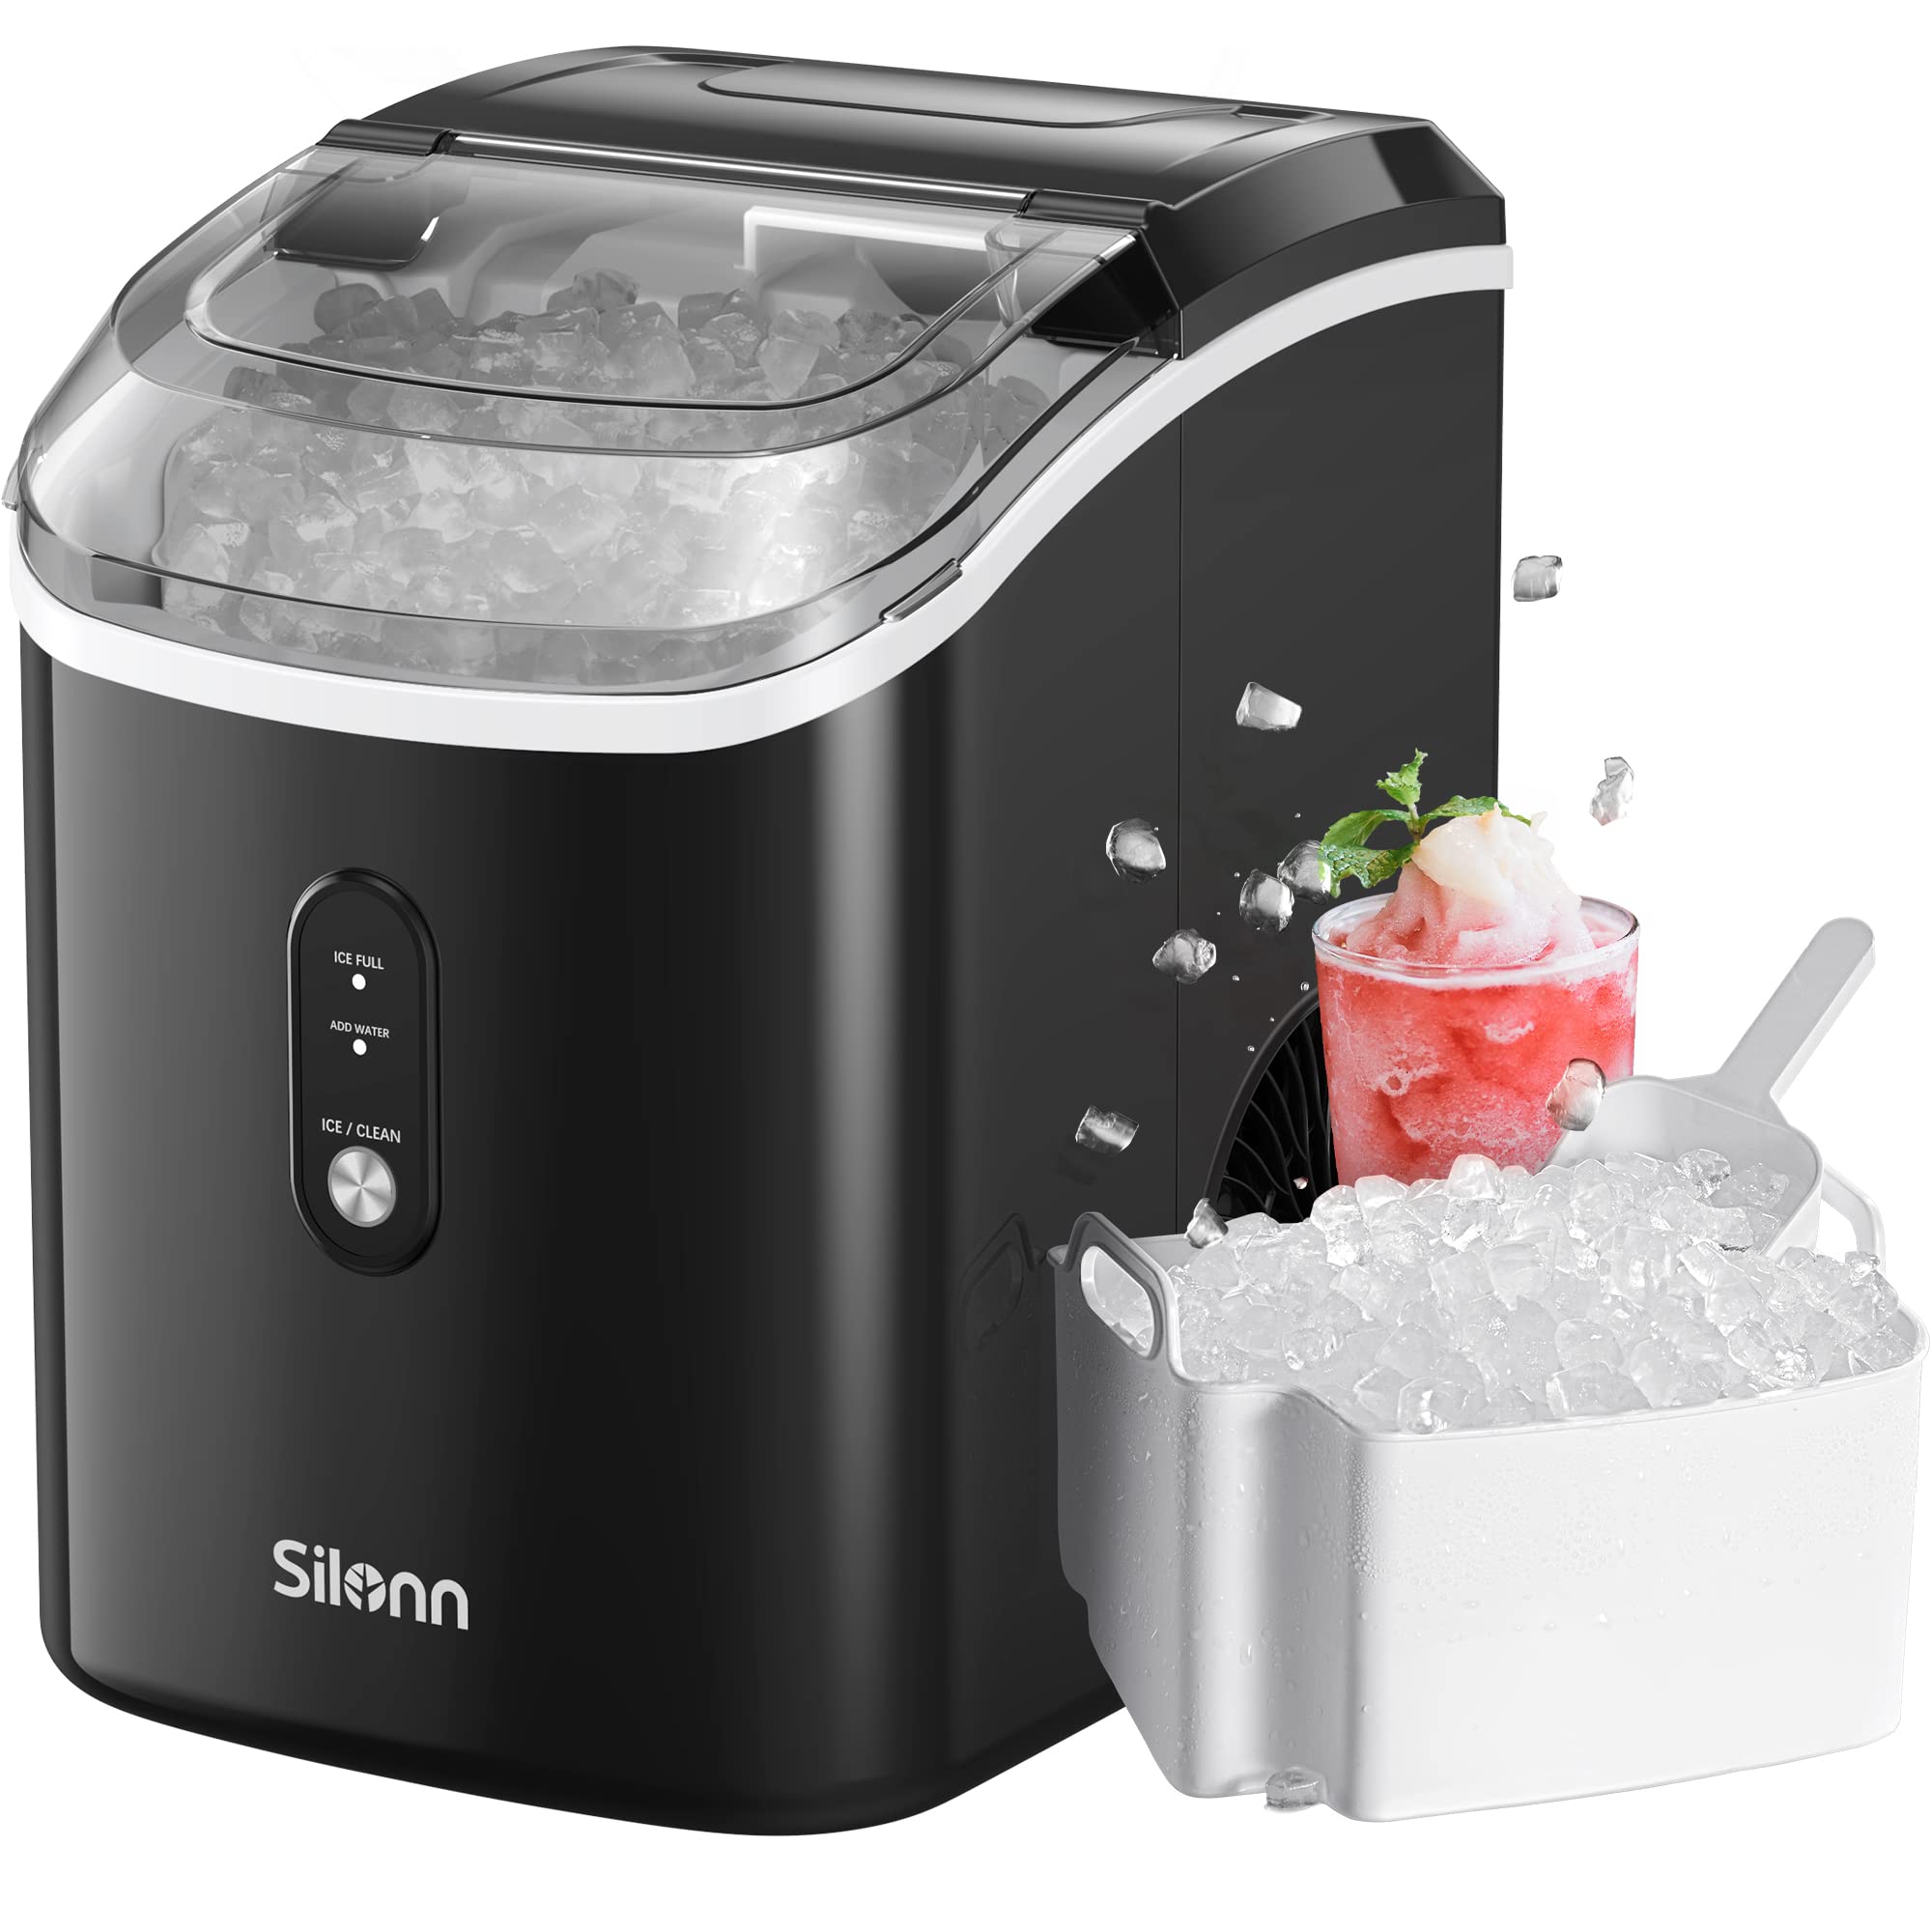 Nugget Countertop Ice Maker, Silonn Chewable Pellet Ice Machine with Self-Cleaning Function, 33lbs/24H for Home, Kitchen, Office, Black Black-transparent